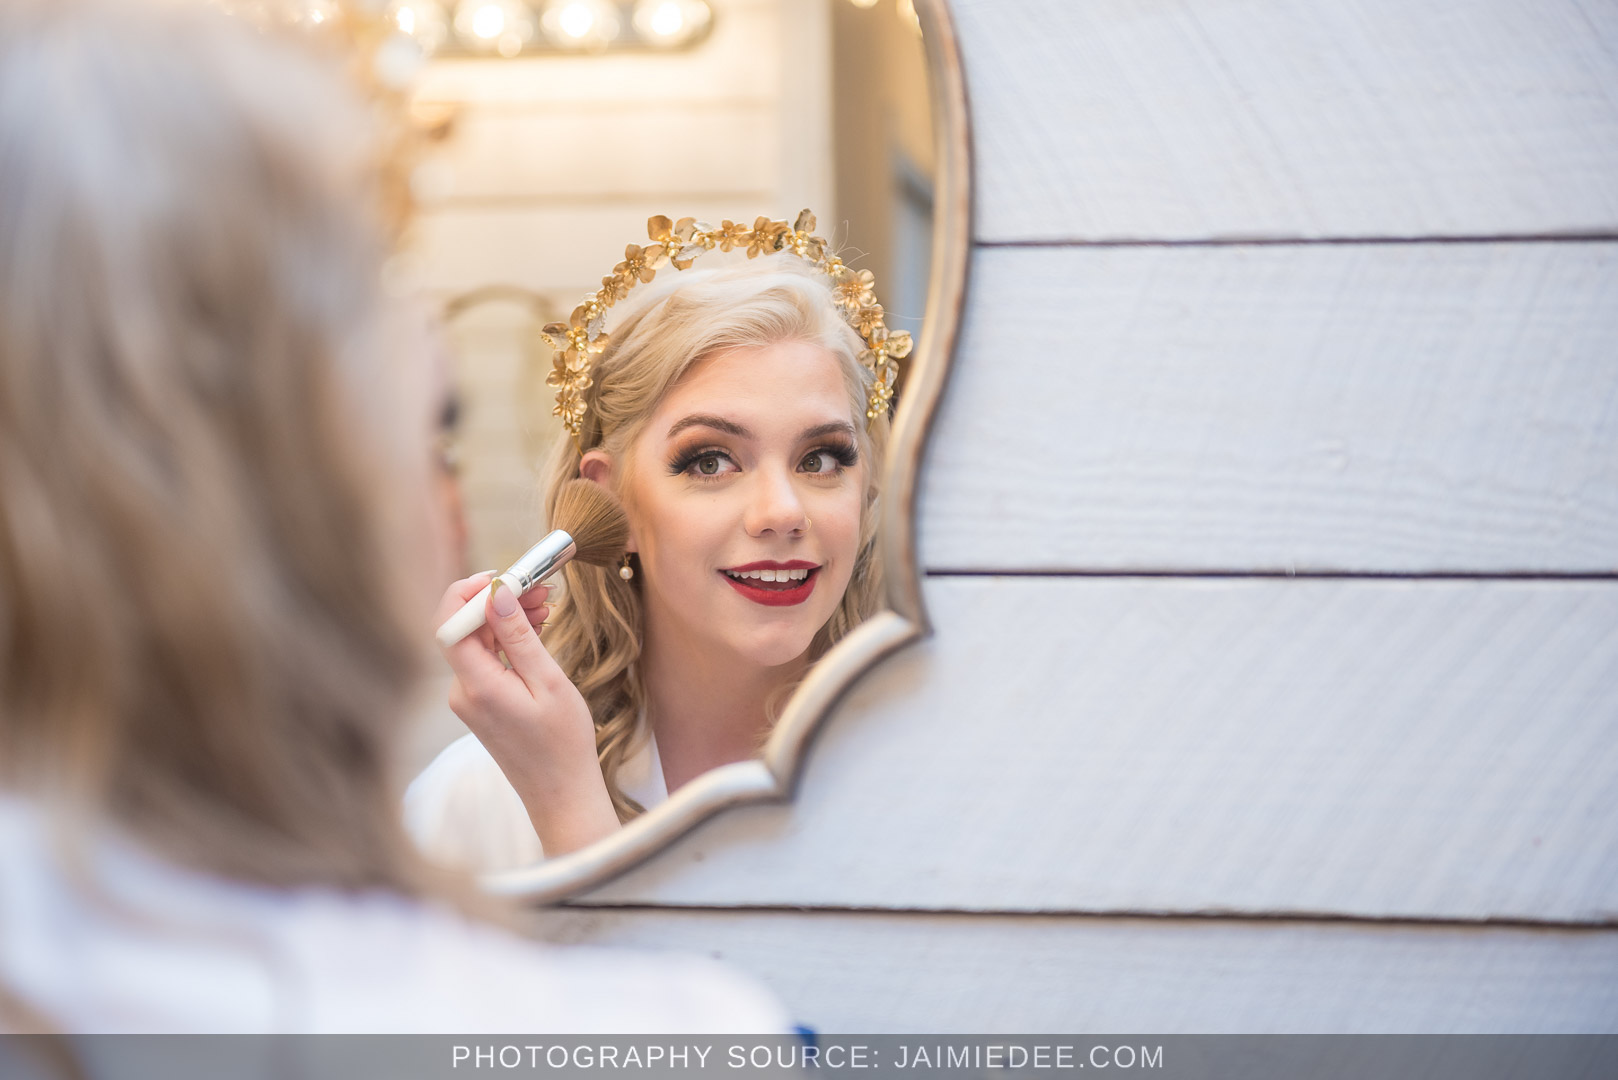 Rocky's Lake Estate Wedding Venue - getting ready in the bridal suite - bride putting on makeup in bride's suite